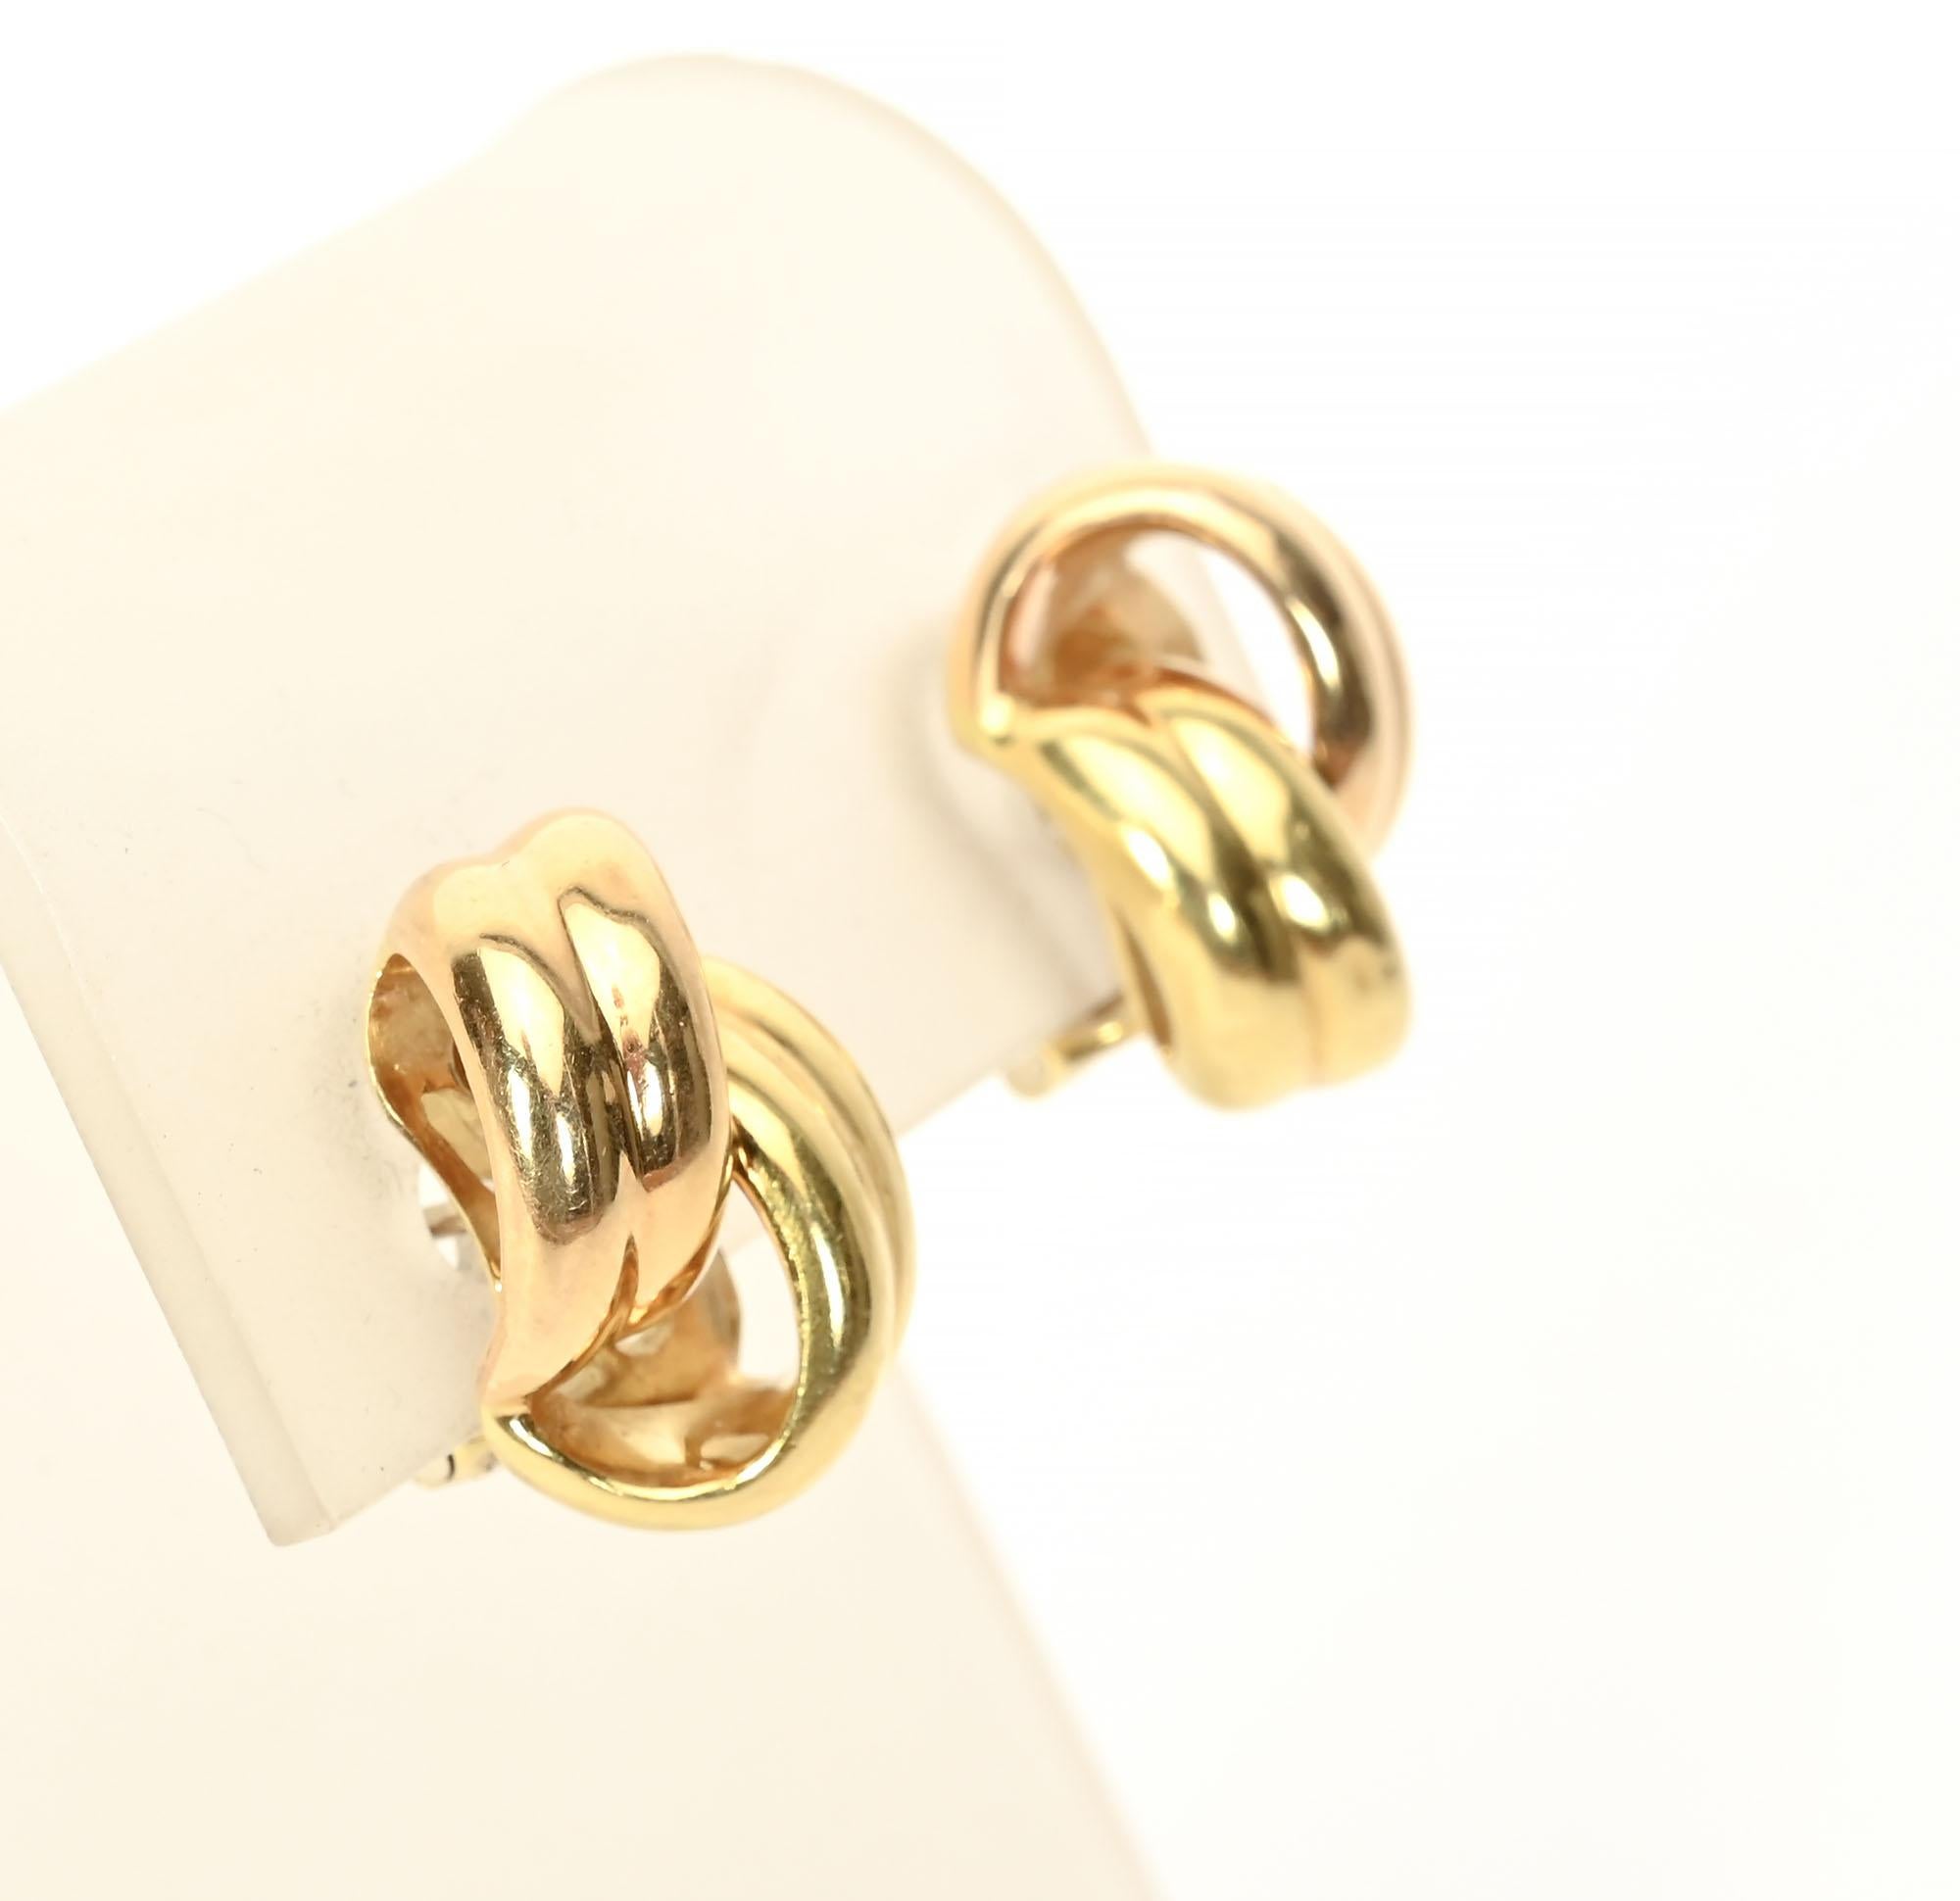 Double loop earrings in 18 karat gold by Roberto Coin. The huggie size earrings have  two loops that intertwine with each other. Backs are posts and clips. The earrings measure 5/8